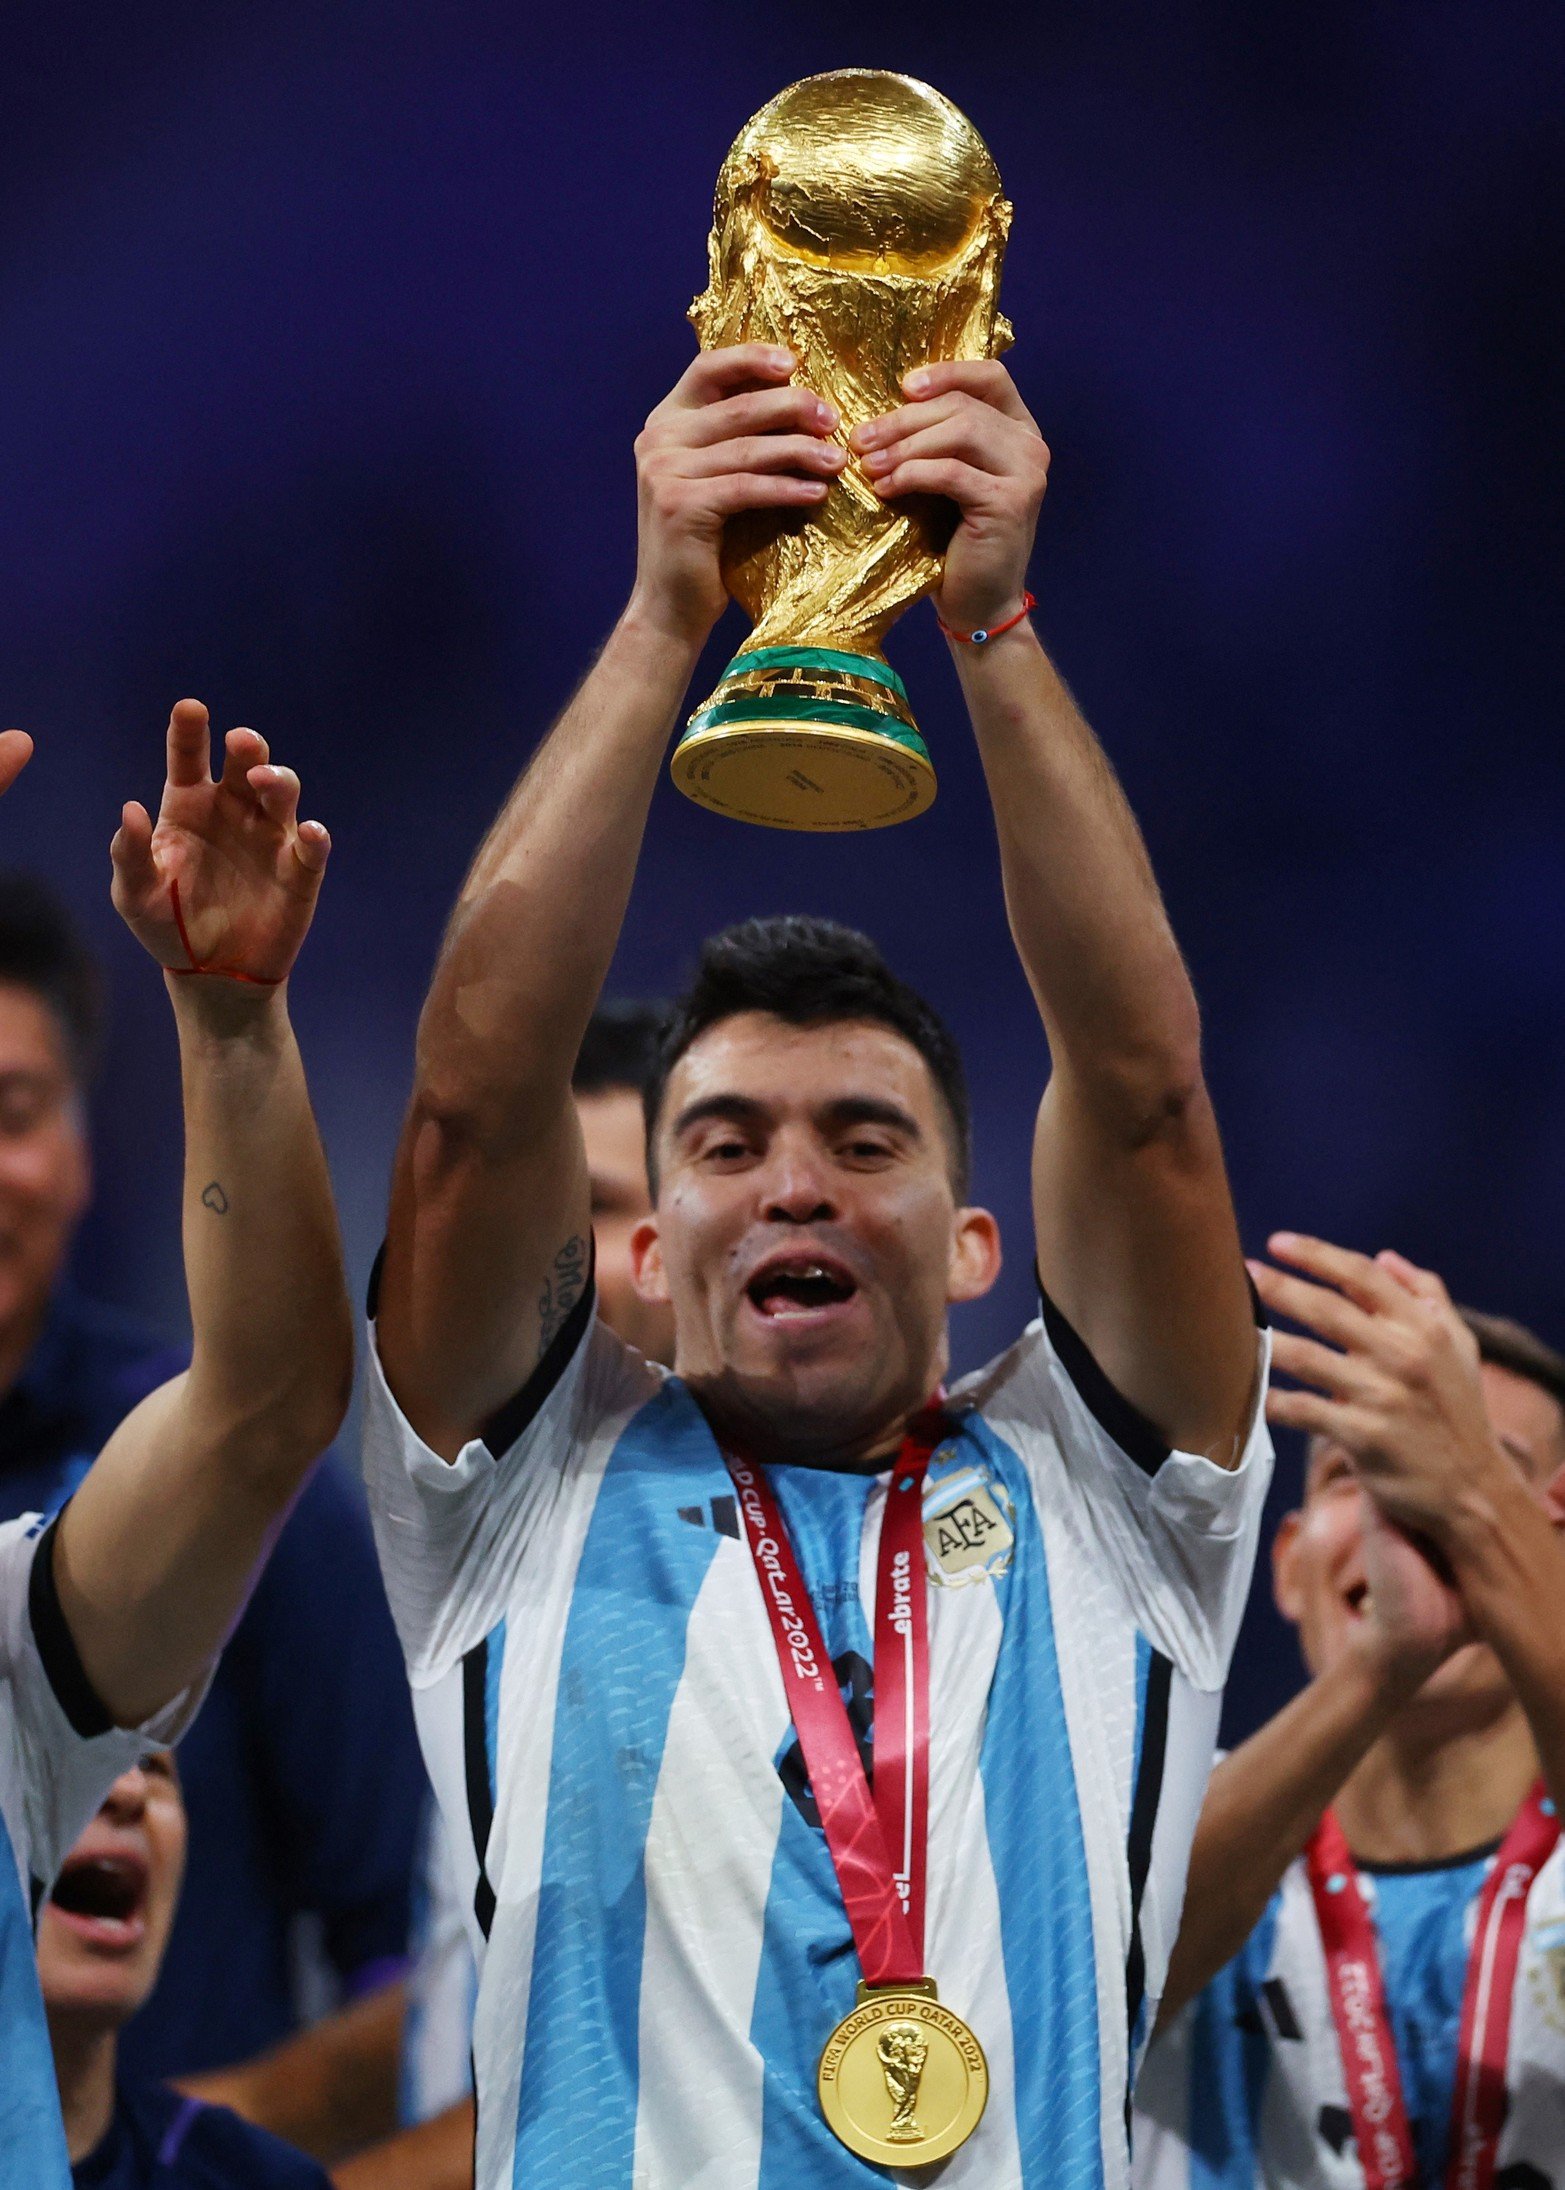 Soccer Football - FIFA World Cup Qatar 2022 - Final - Argentina v France - Lusail Stadium, Lusail, Qatar - December 18, 2022
Argentina's Marcos Acuna celebrates with the trophy after winning the World Cup REUTERS/Kai Pfaffenbach